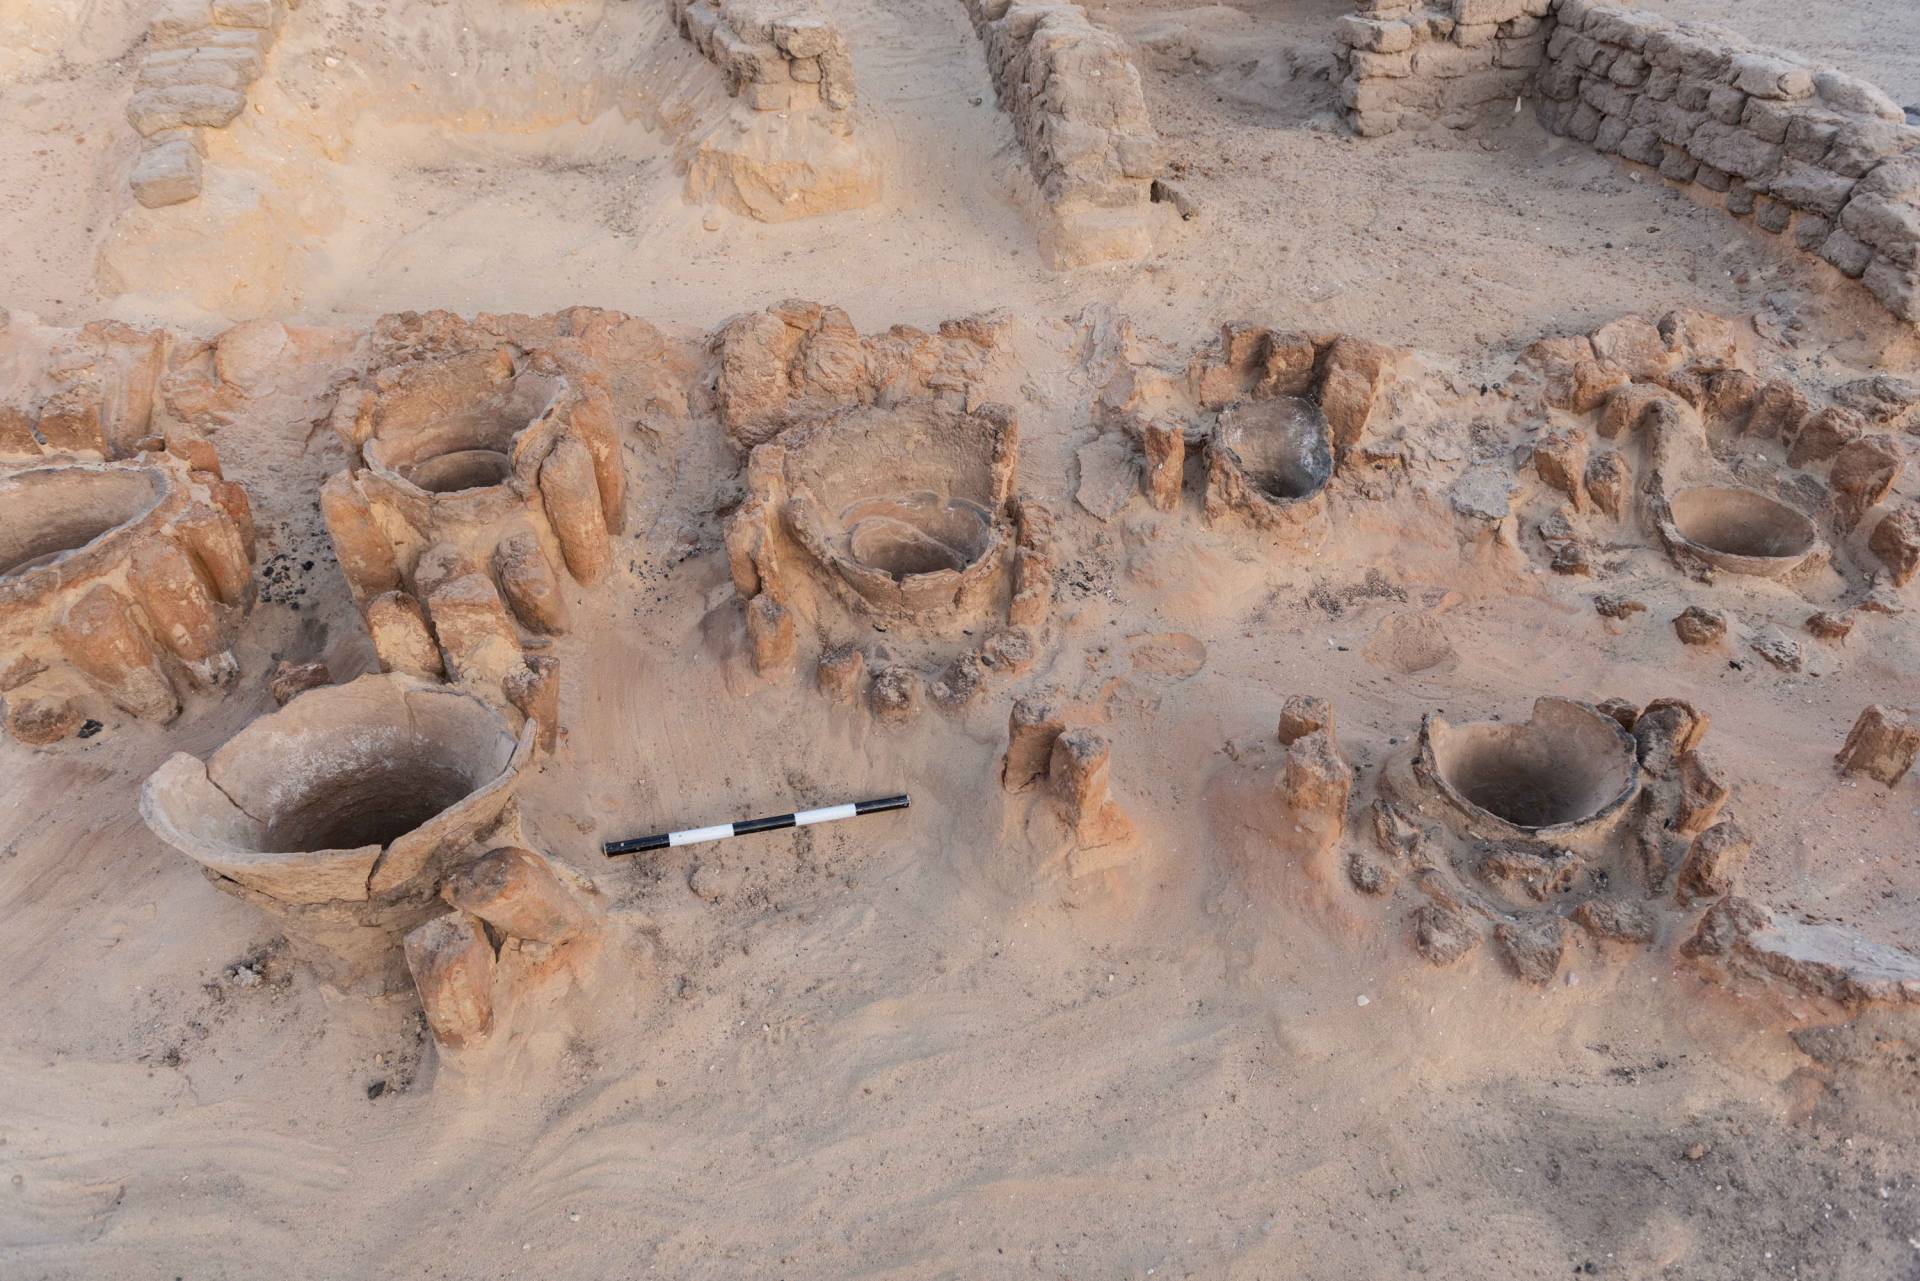 Openings of urns used to hold ingredients for brewing visible in the sand